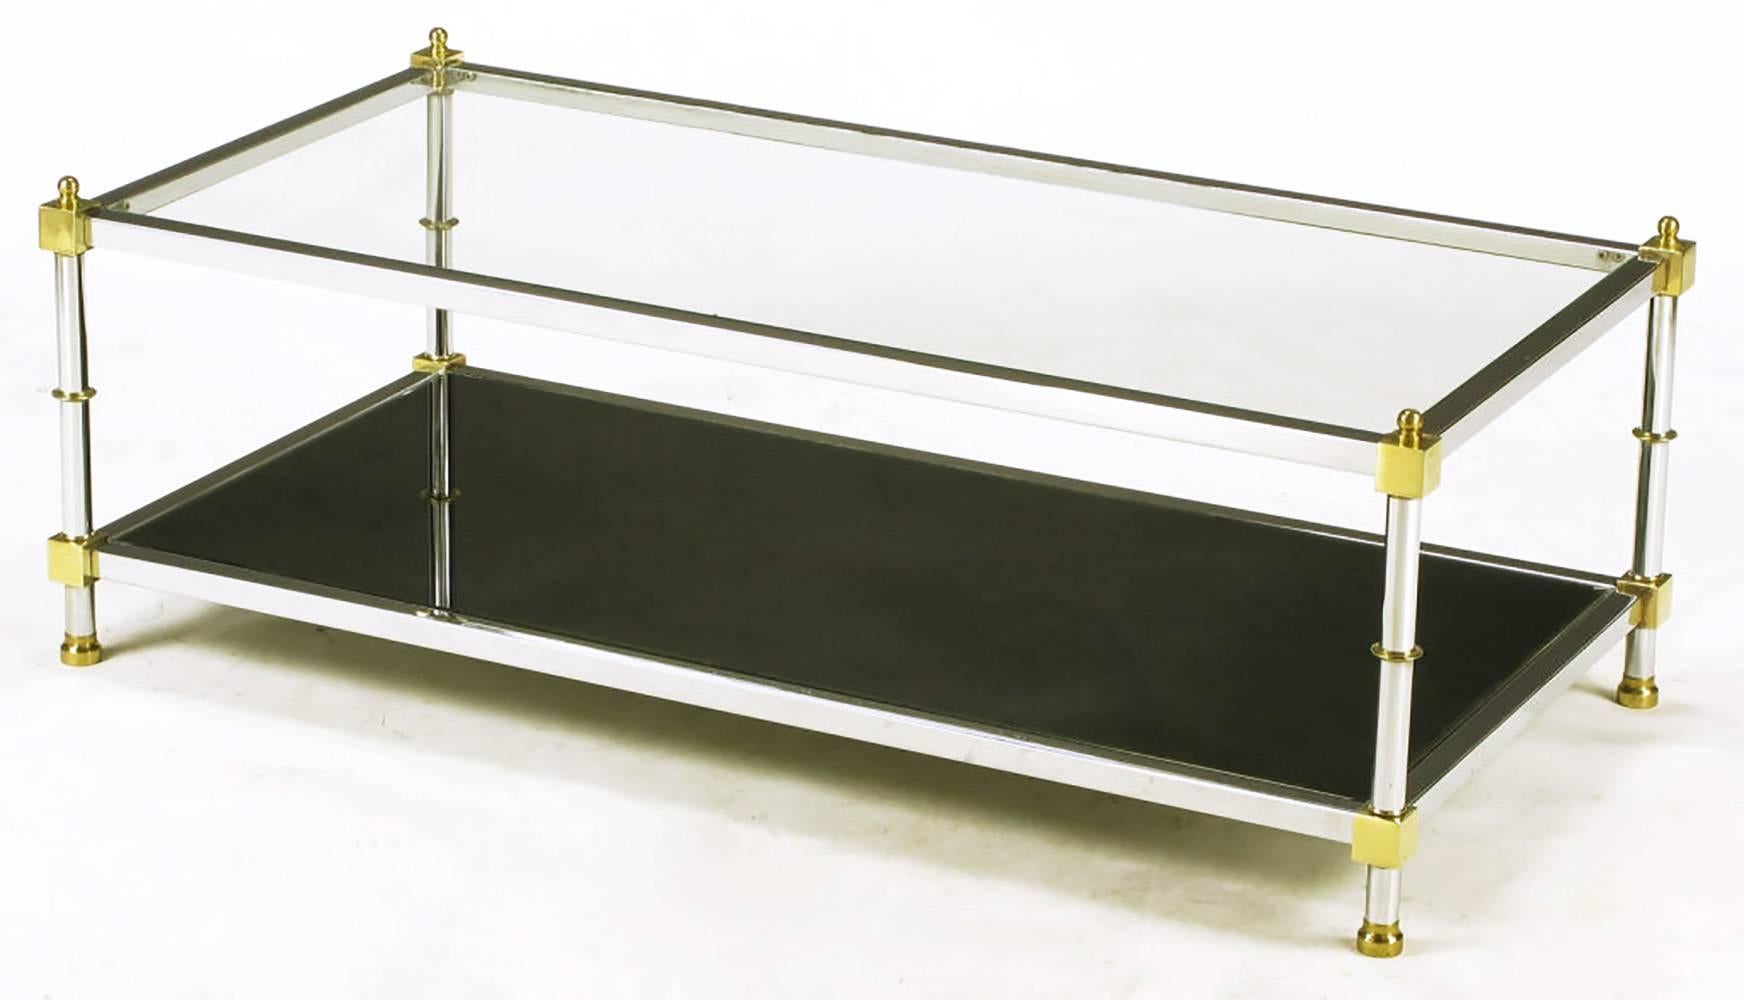 Square stock steel bars with chromed finish and brass block connectors make up this rectangular coffee table. Clear glass top tier with mirrored bottom tier. Brass spacers and feet.